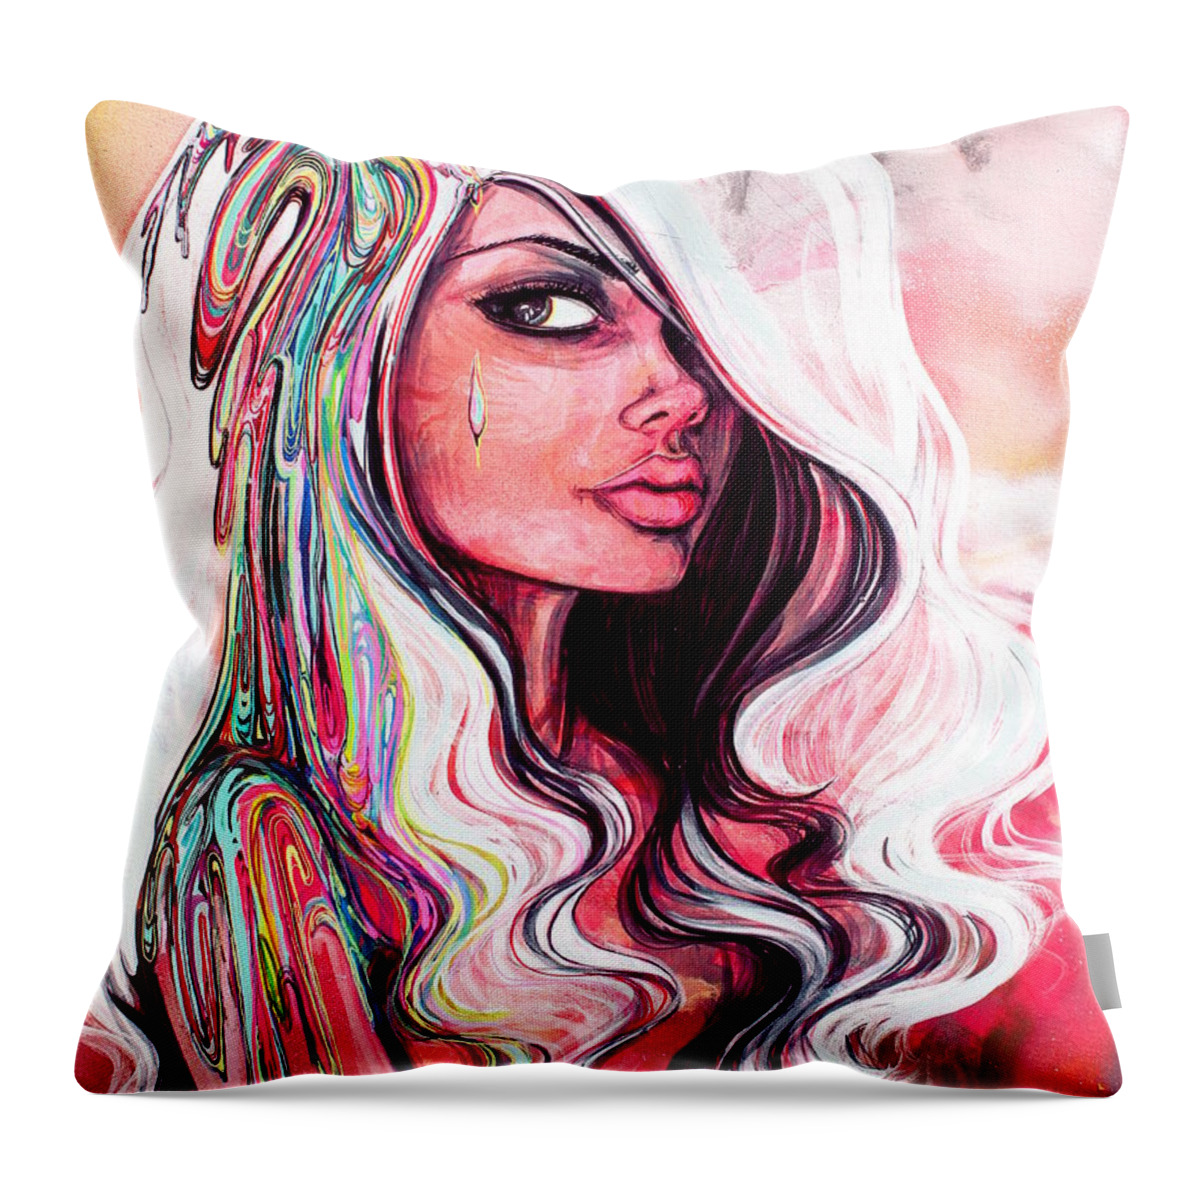 Nude Throw Pillow featuring the painting Pour by Aja Trier